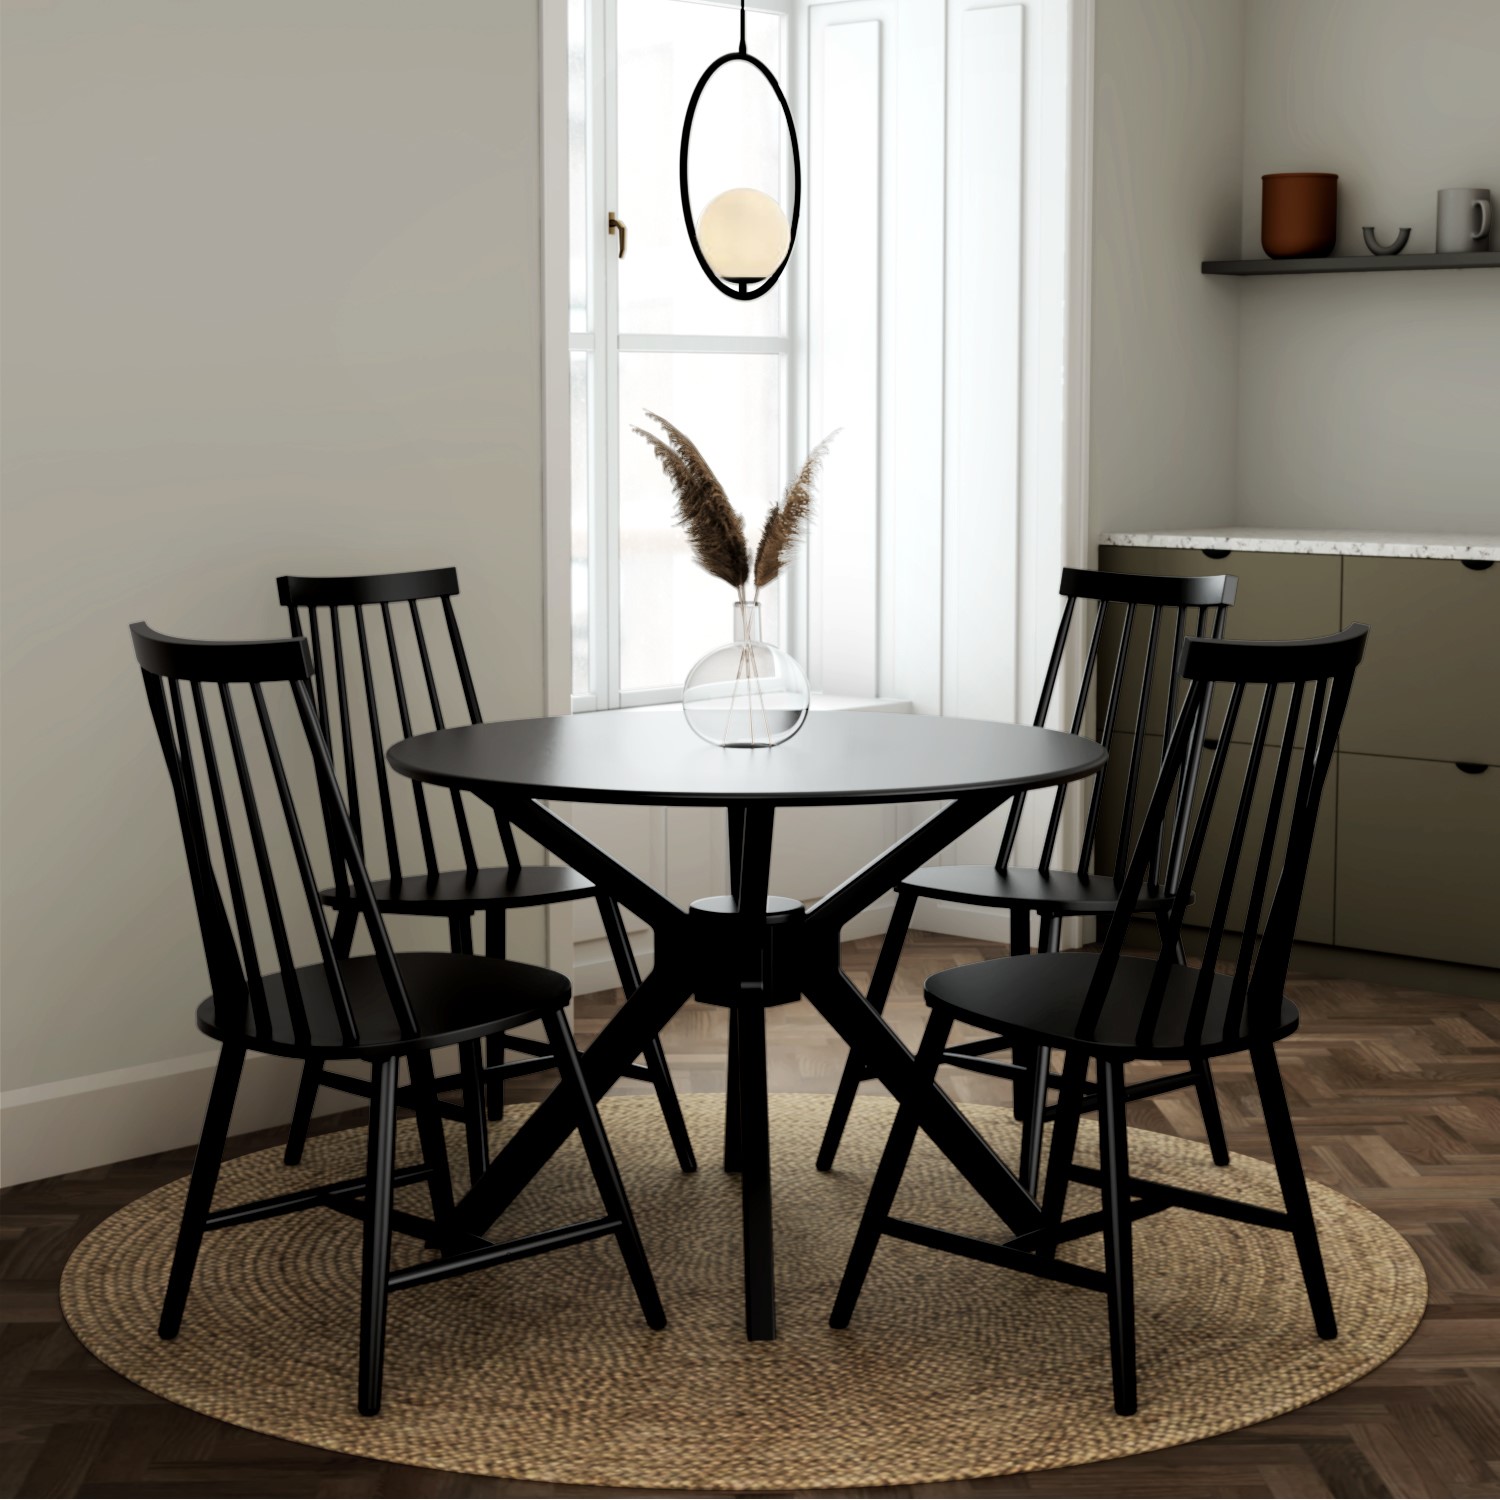 4 Seater Round Black Dining Set With, Dining Room Chairs Set Of 4 Black